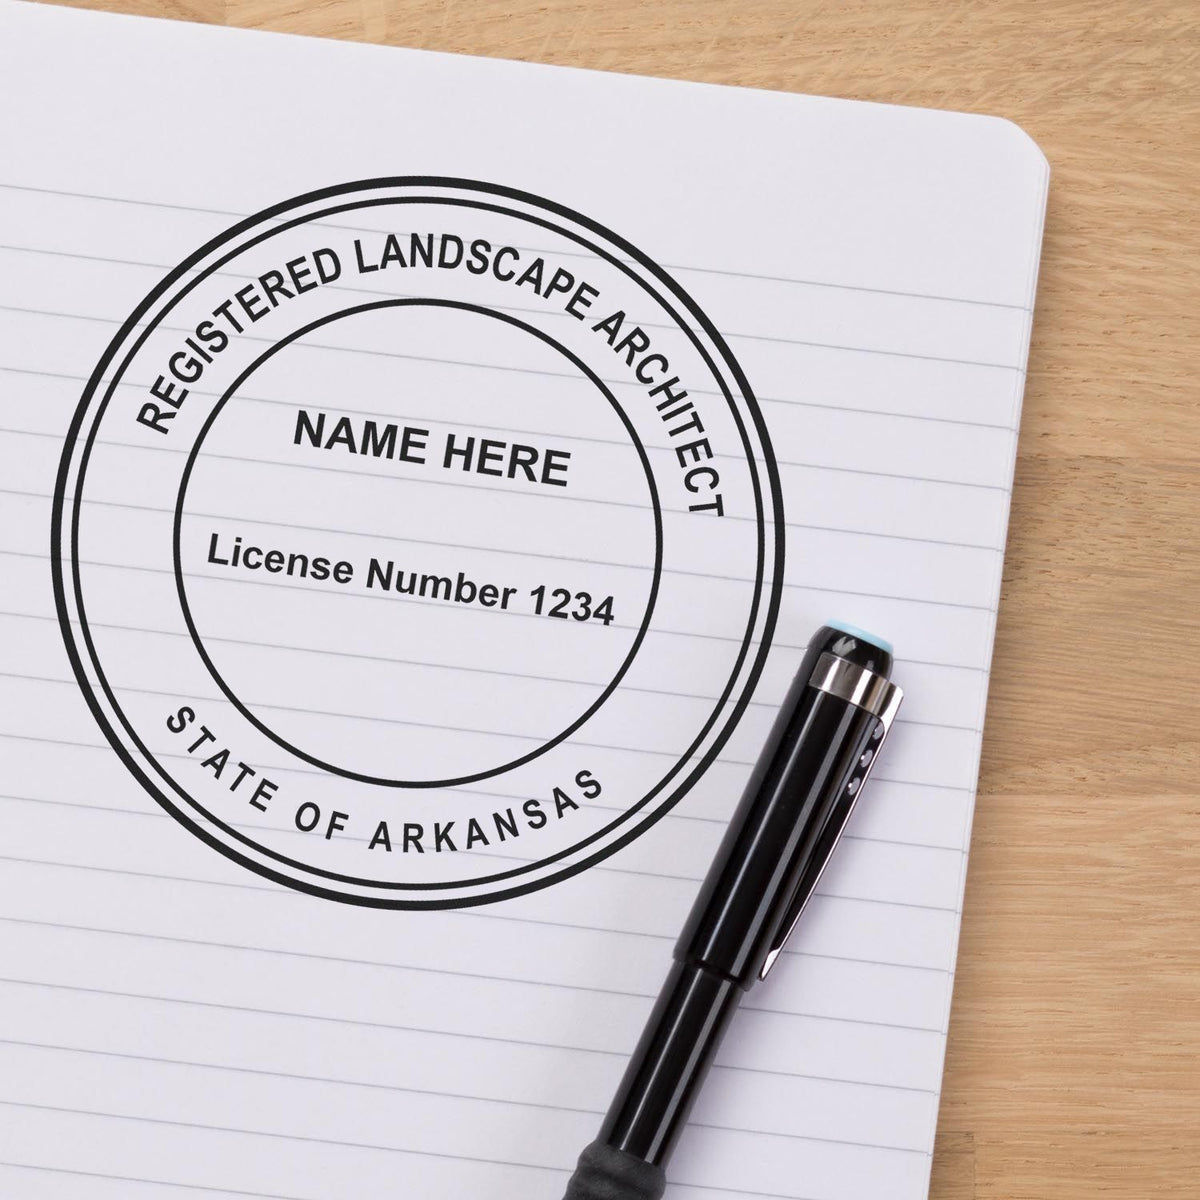 This paper is stamped with a sample imprint of the Arkansas Landscape Architectural Seal Stamp, signifying its quality and reliability.